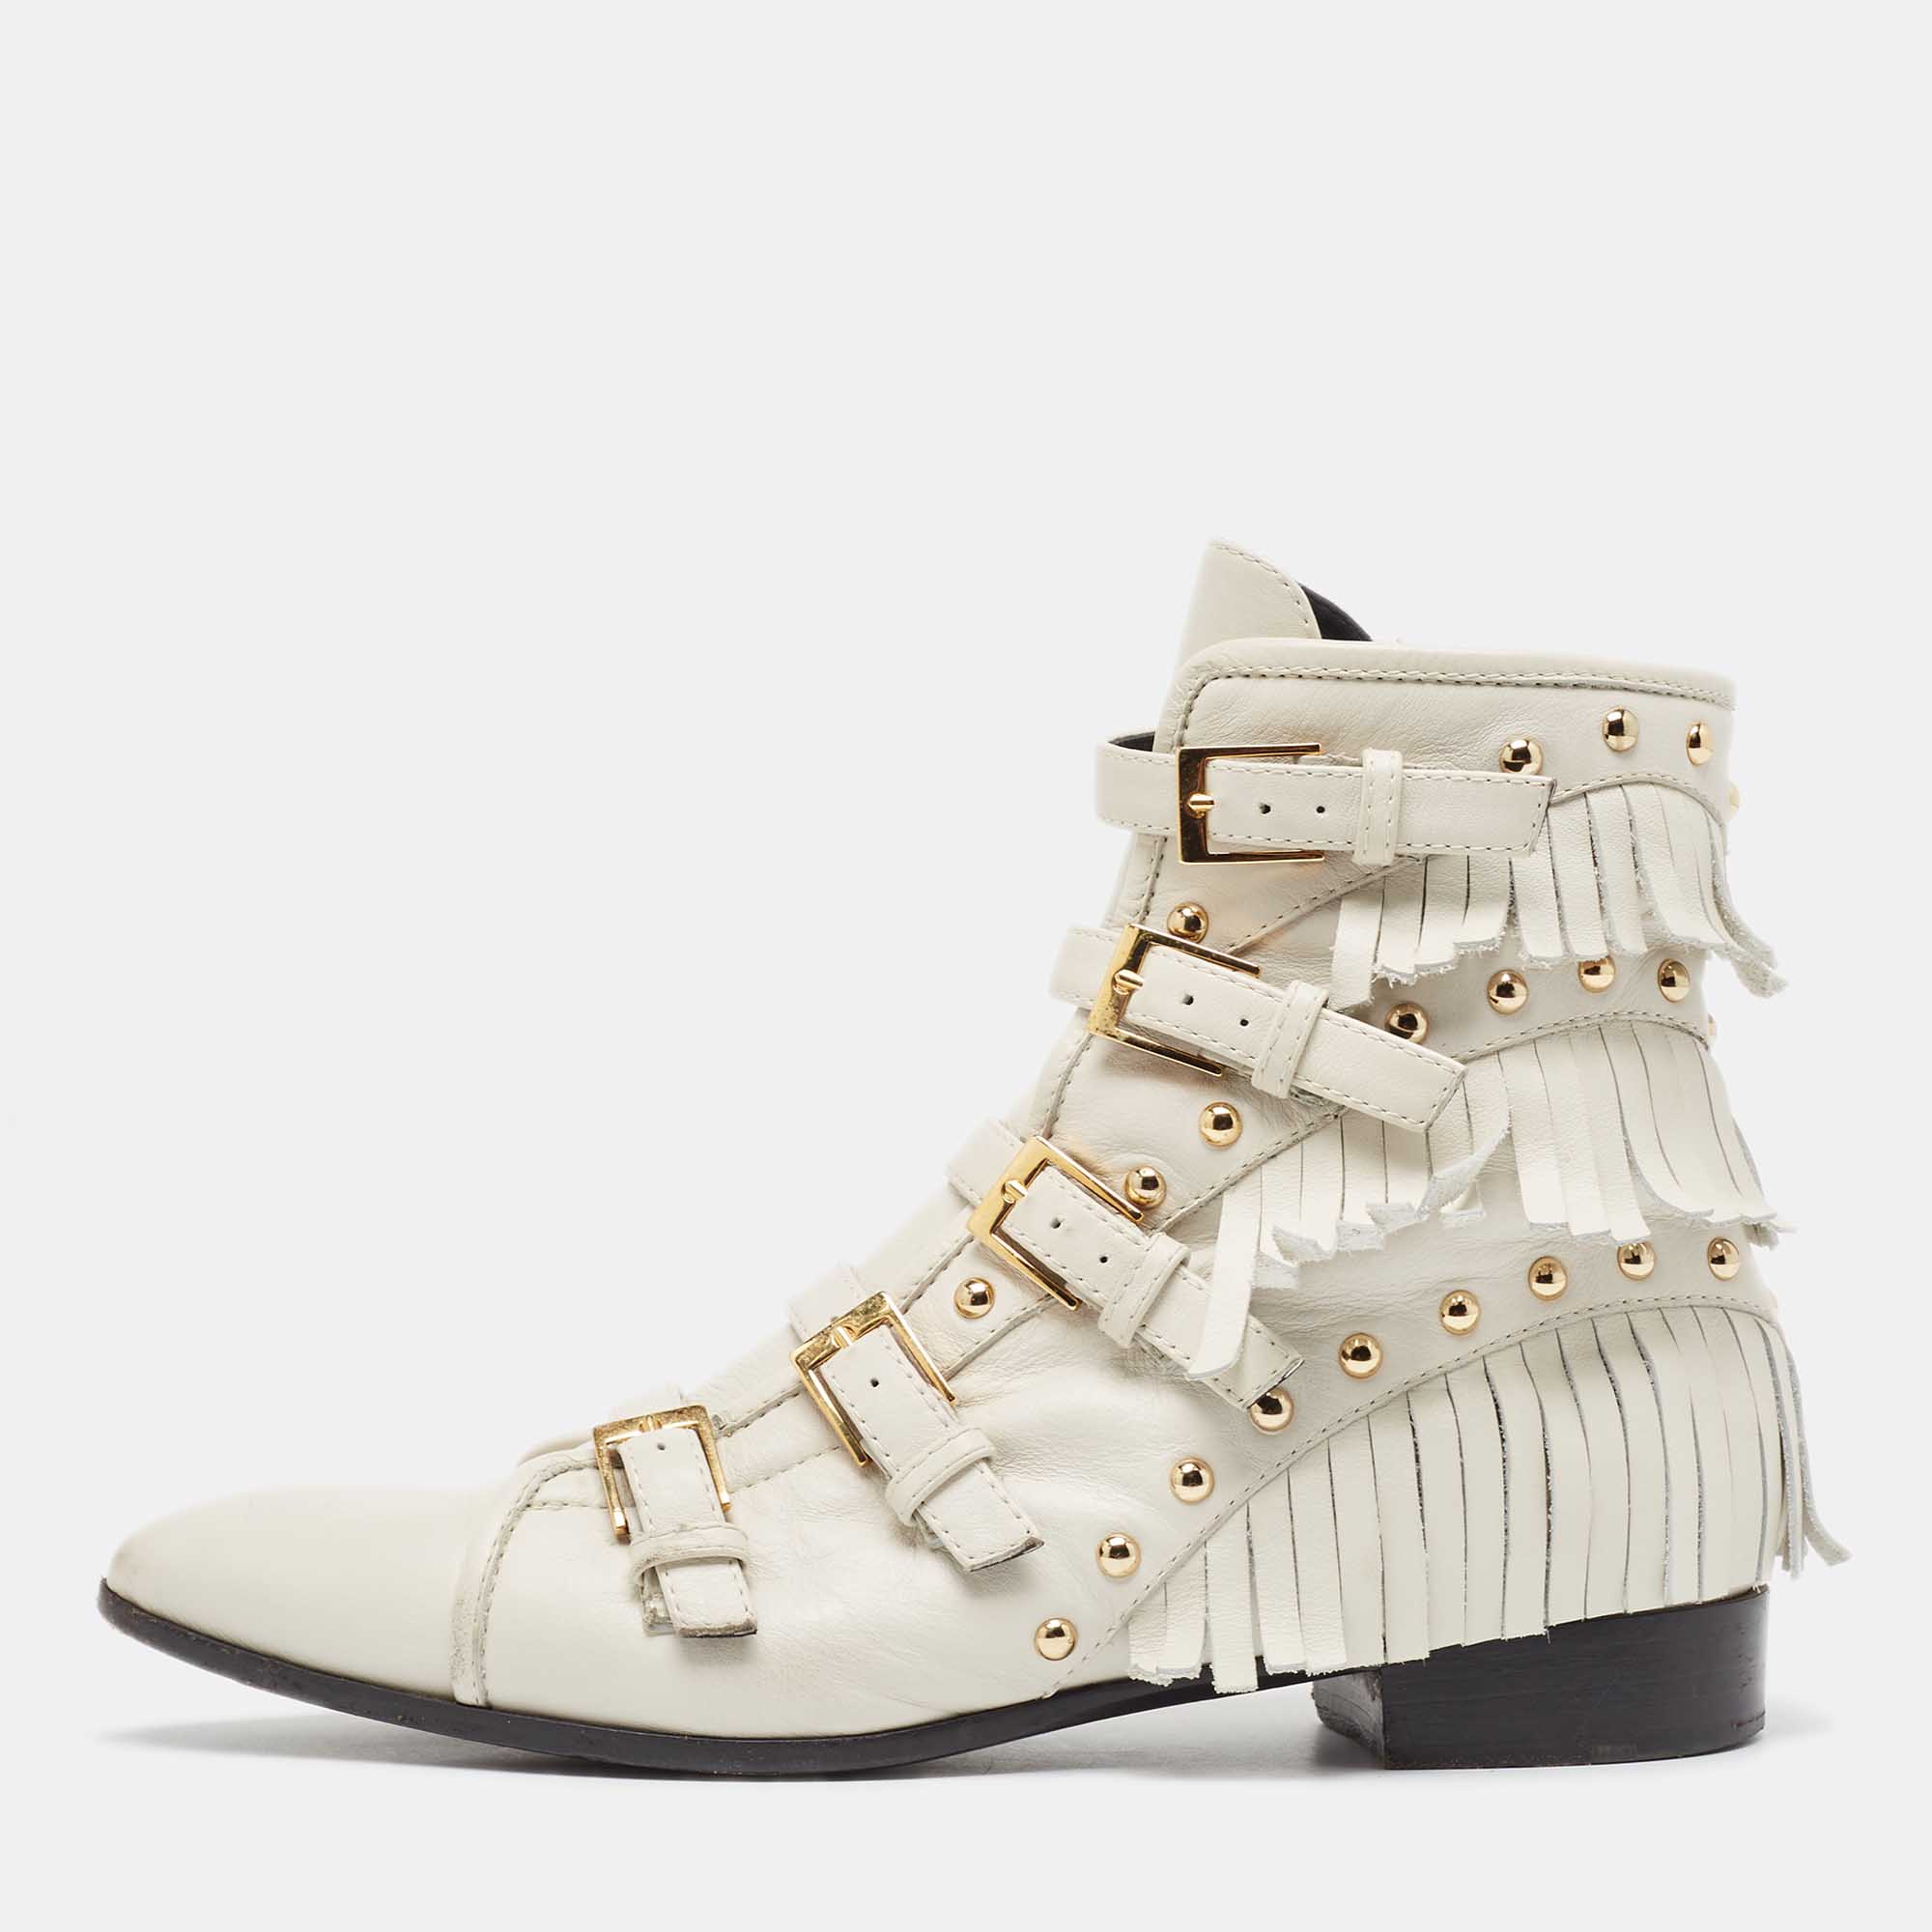 

Giuseppe Zanotti Cream Leather Studded and Fringed Buckled Ankle Boots Size